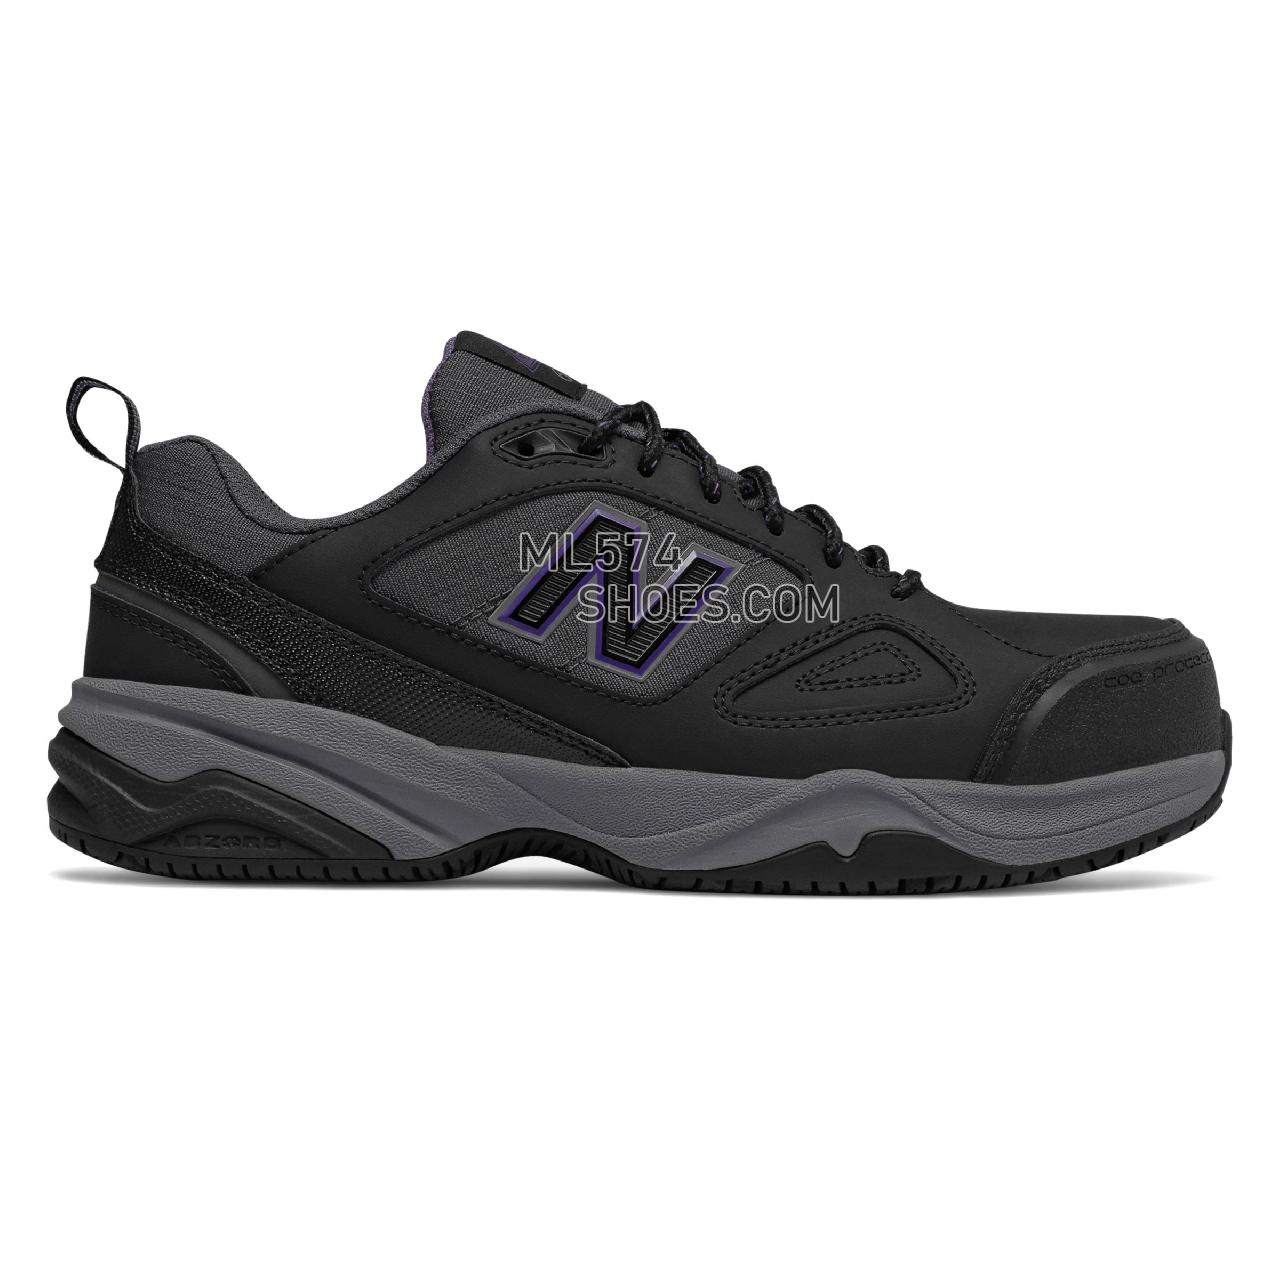 New Balance Steel Toe 627v2 Leather - Women's 627 - Industrial Black with Purple - WID627R2